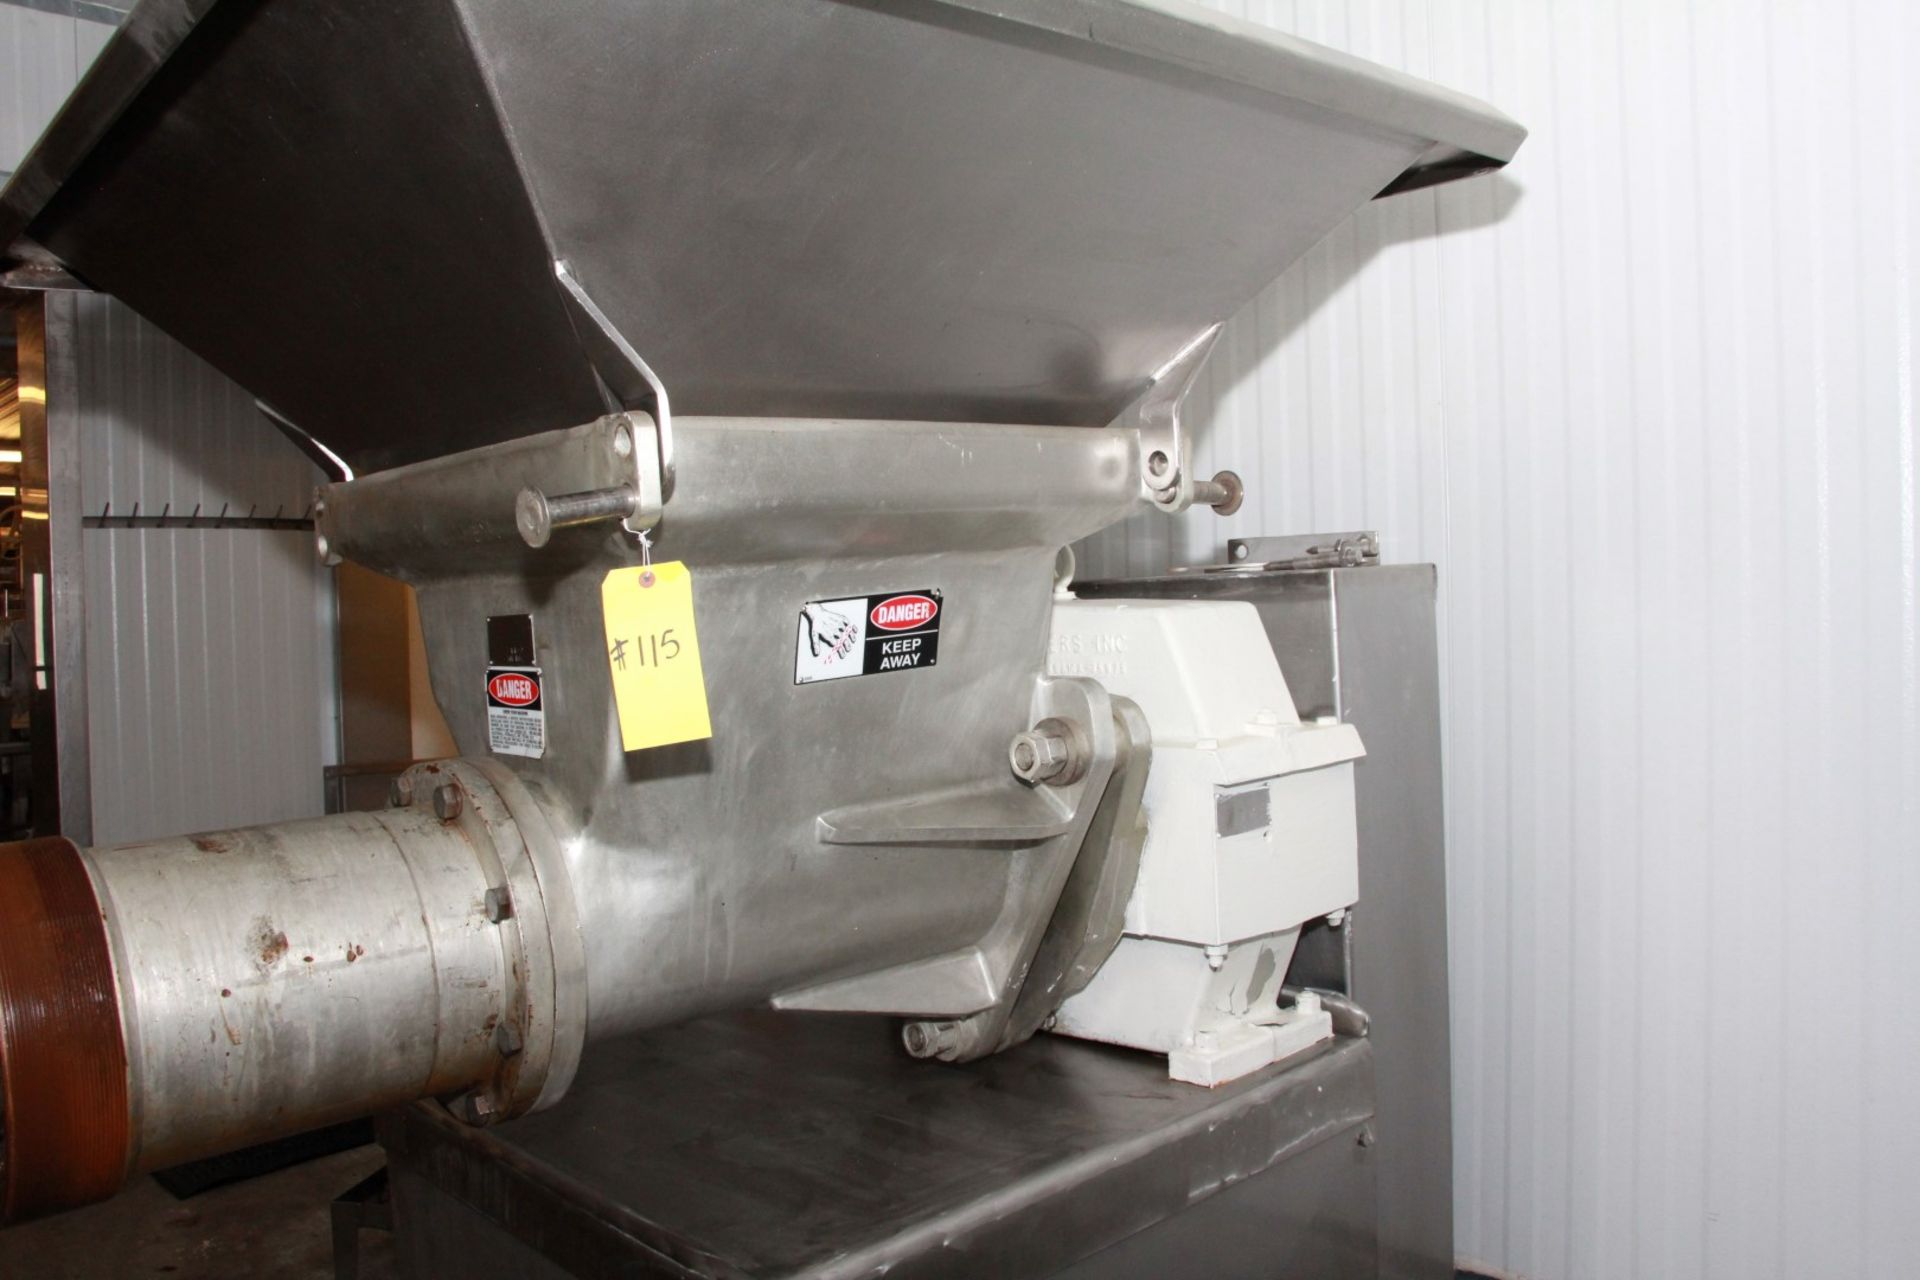 DIXIE 11" GRINDER WITH S/S UNDERMOUNT FRAME. MD# 11-9. SN: 01-106. BUILT 2001. - Image 8 of 8